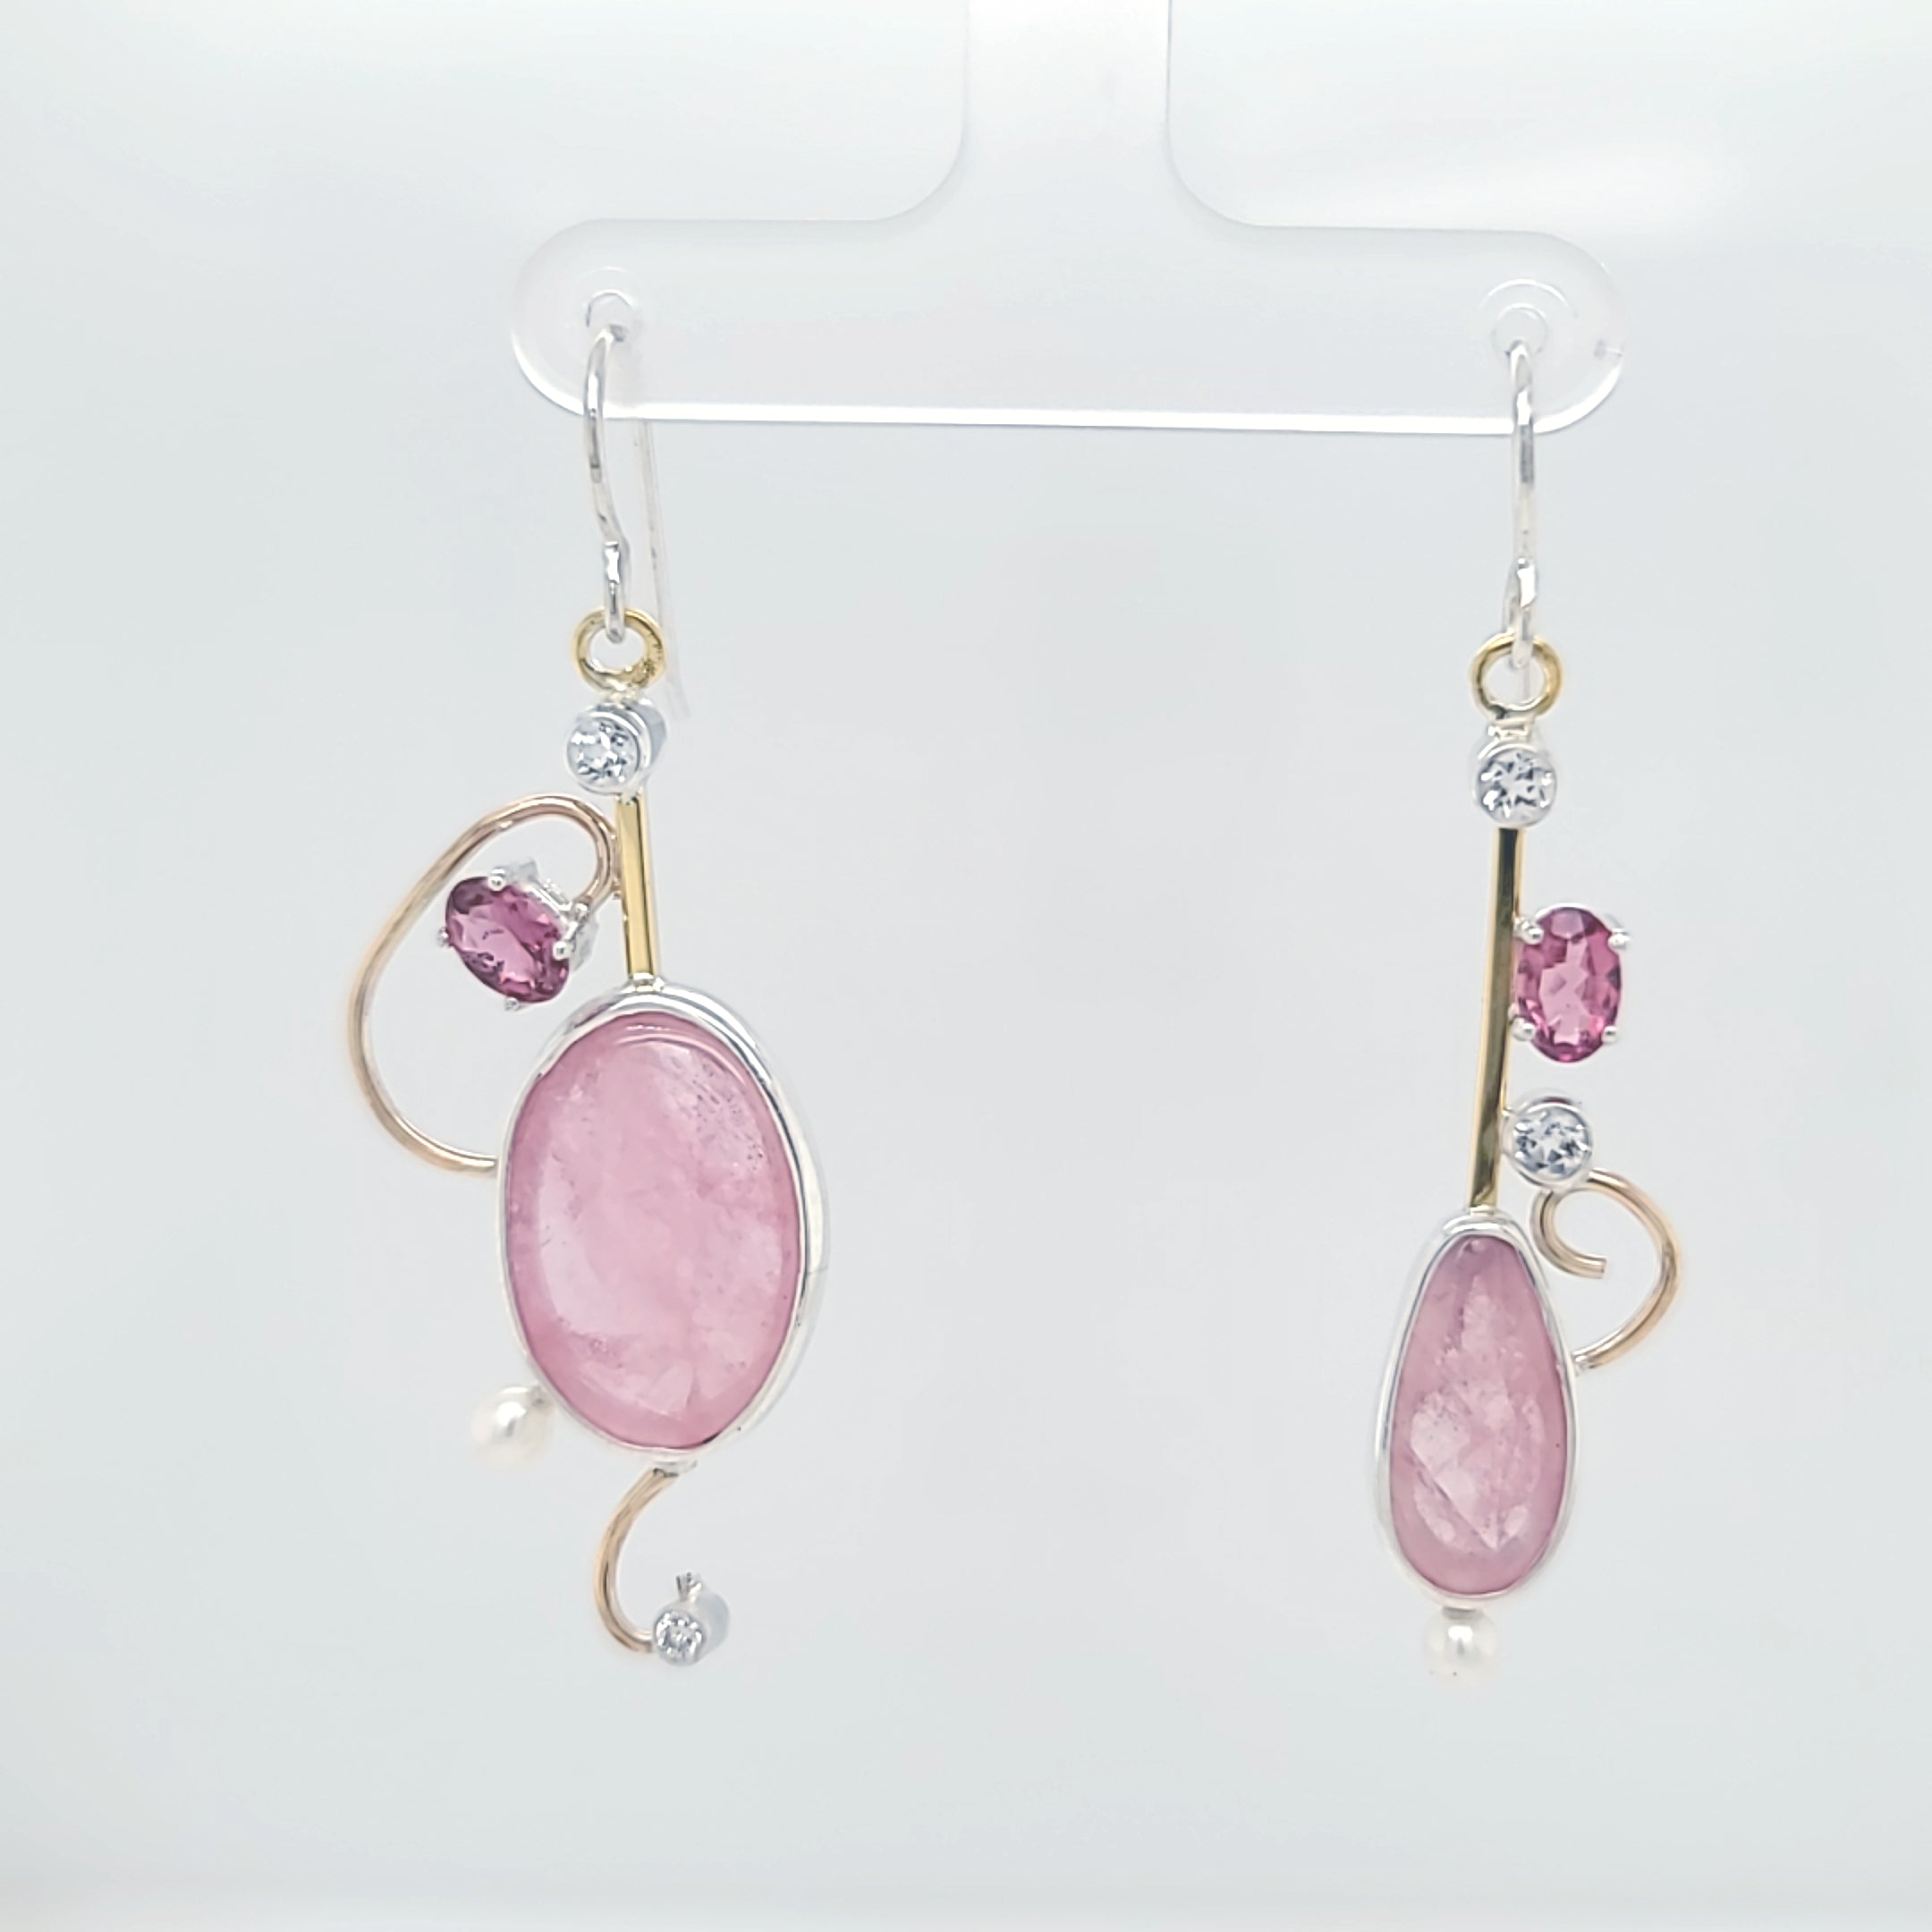 For Mindy~Pink Tourmaline, White Topaz, Freshwater Pearl with 22k Gold